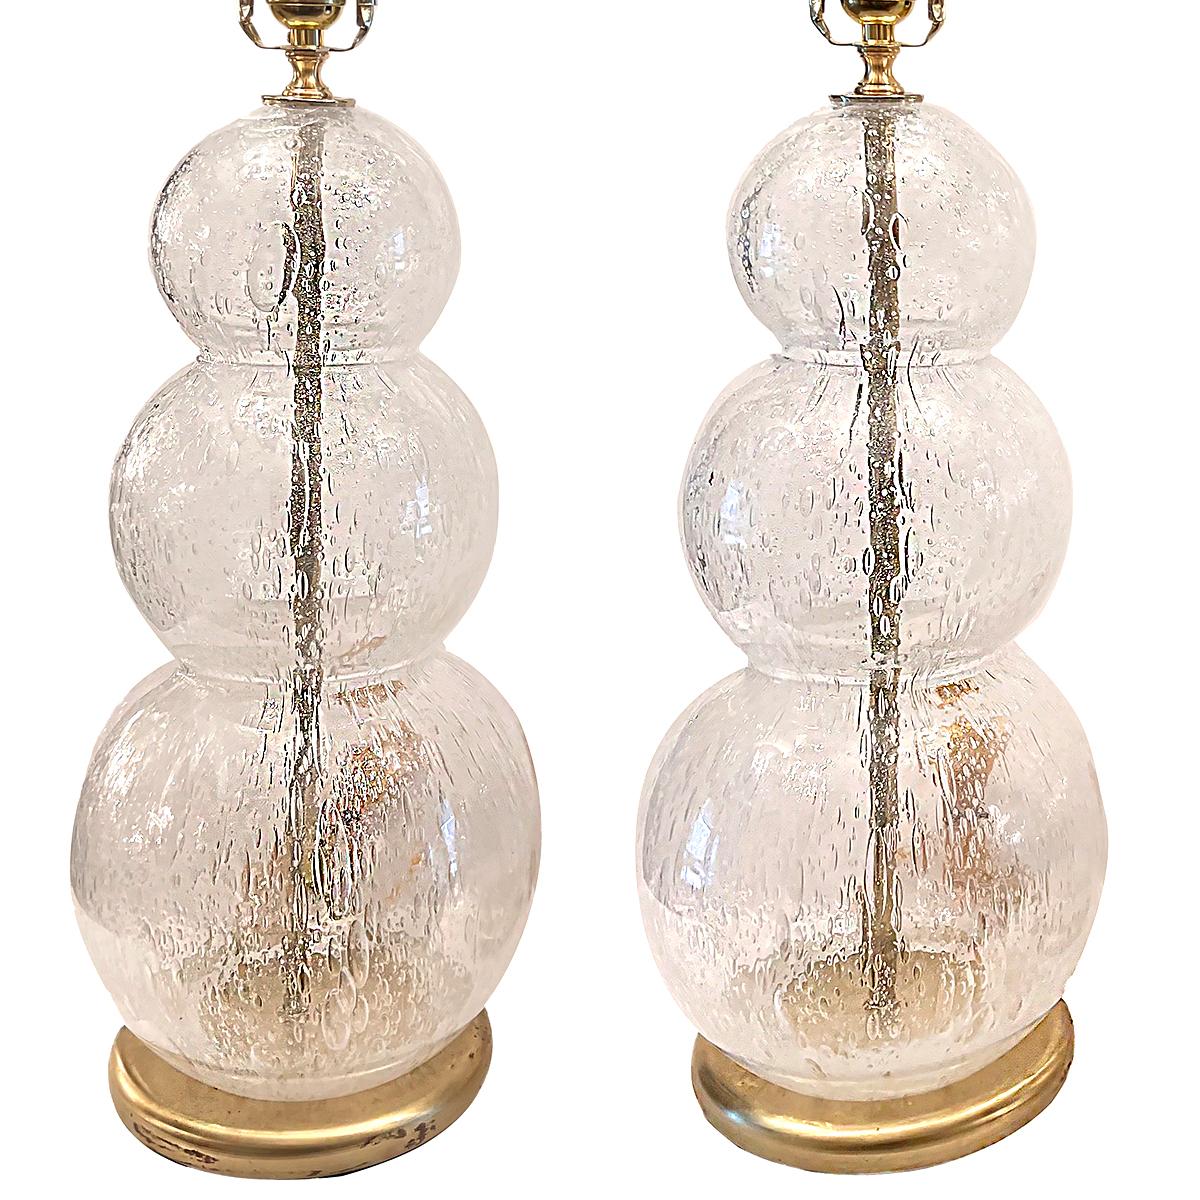 Pair of circa 1960's Italian blown glass table lamps with gilt bases.

Measurements:
Height of body:  18.75